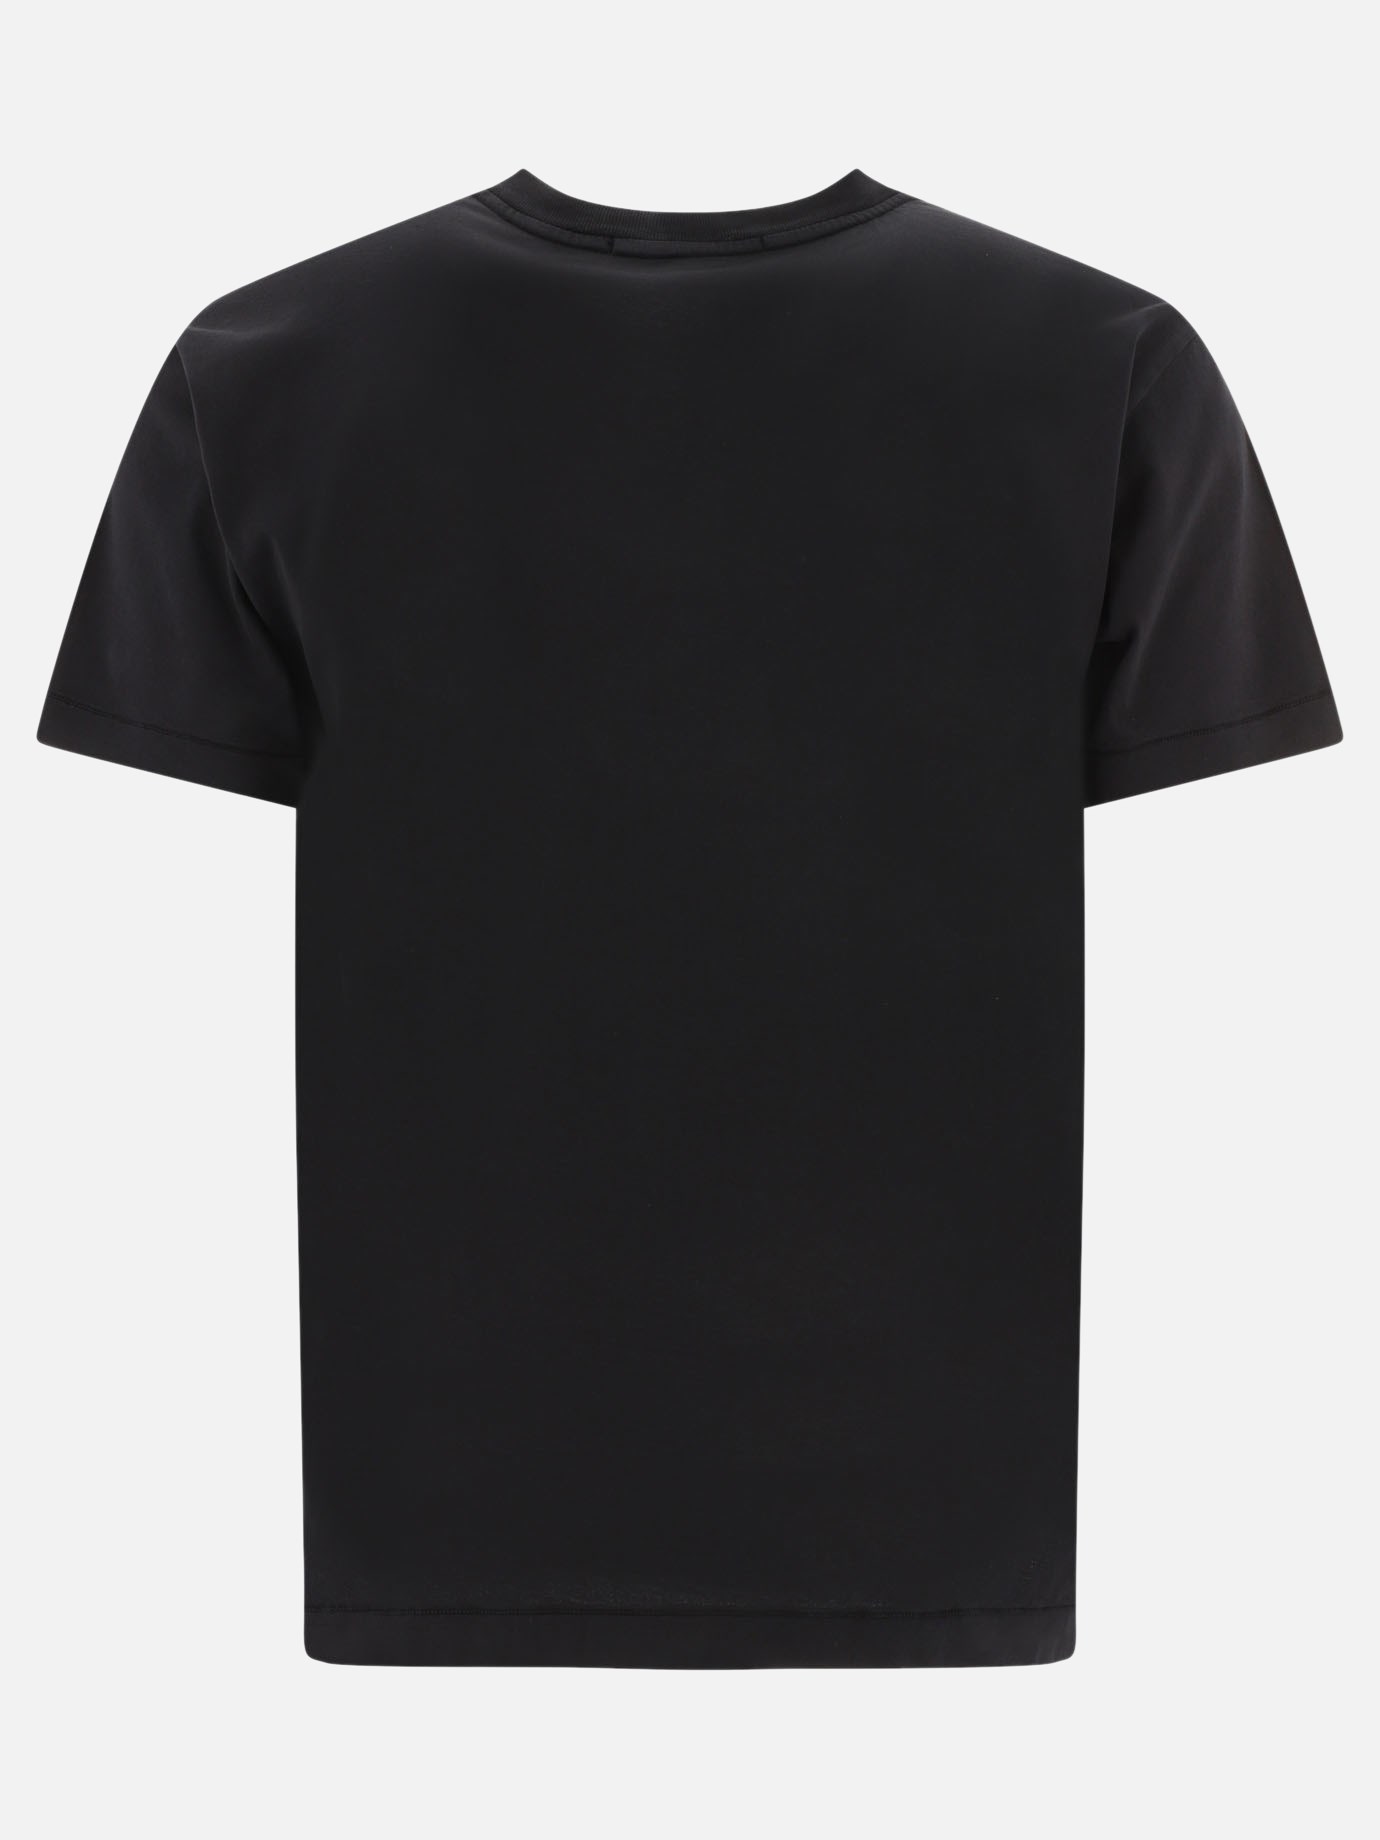 T-shirt  Compass  by Stone Island